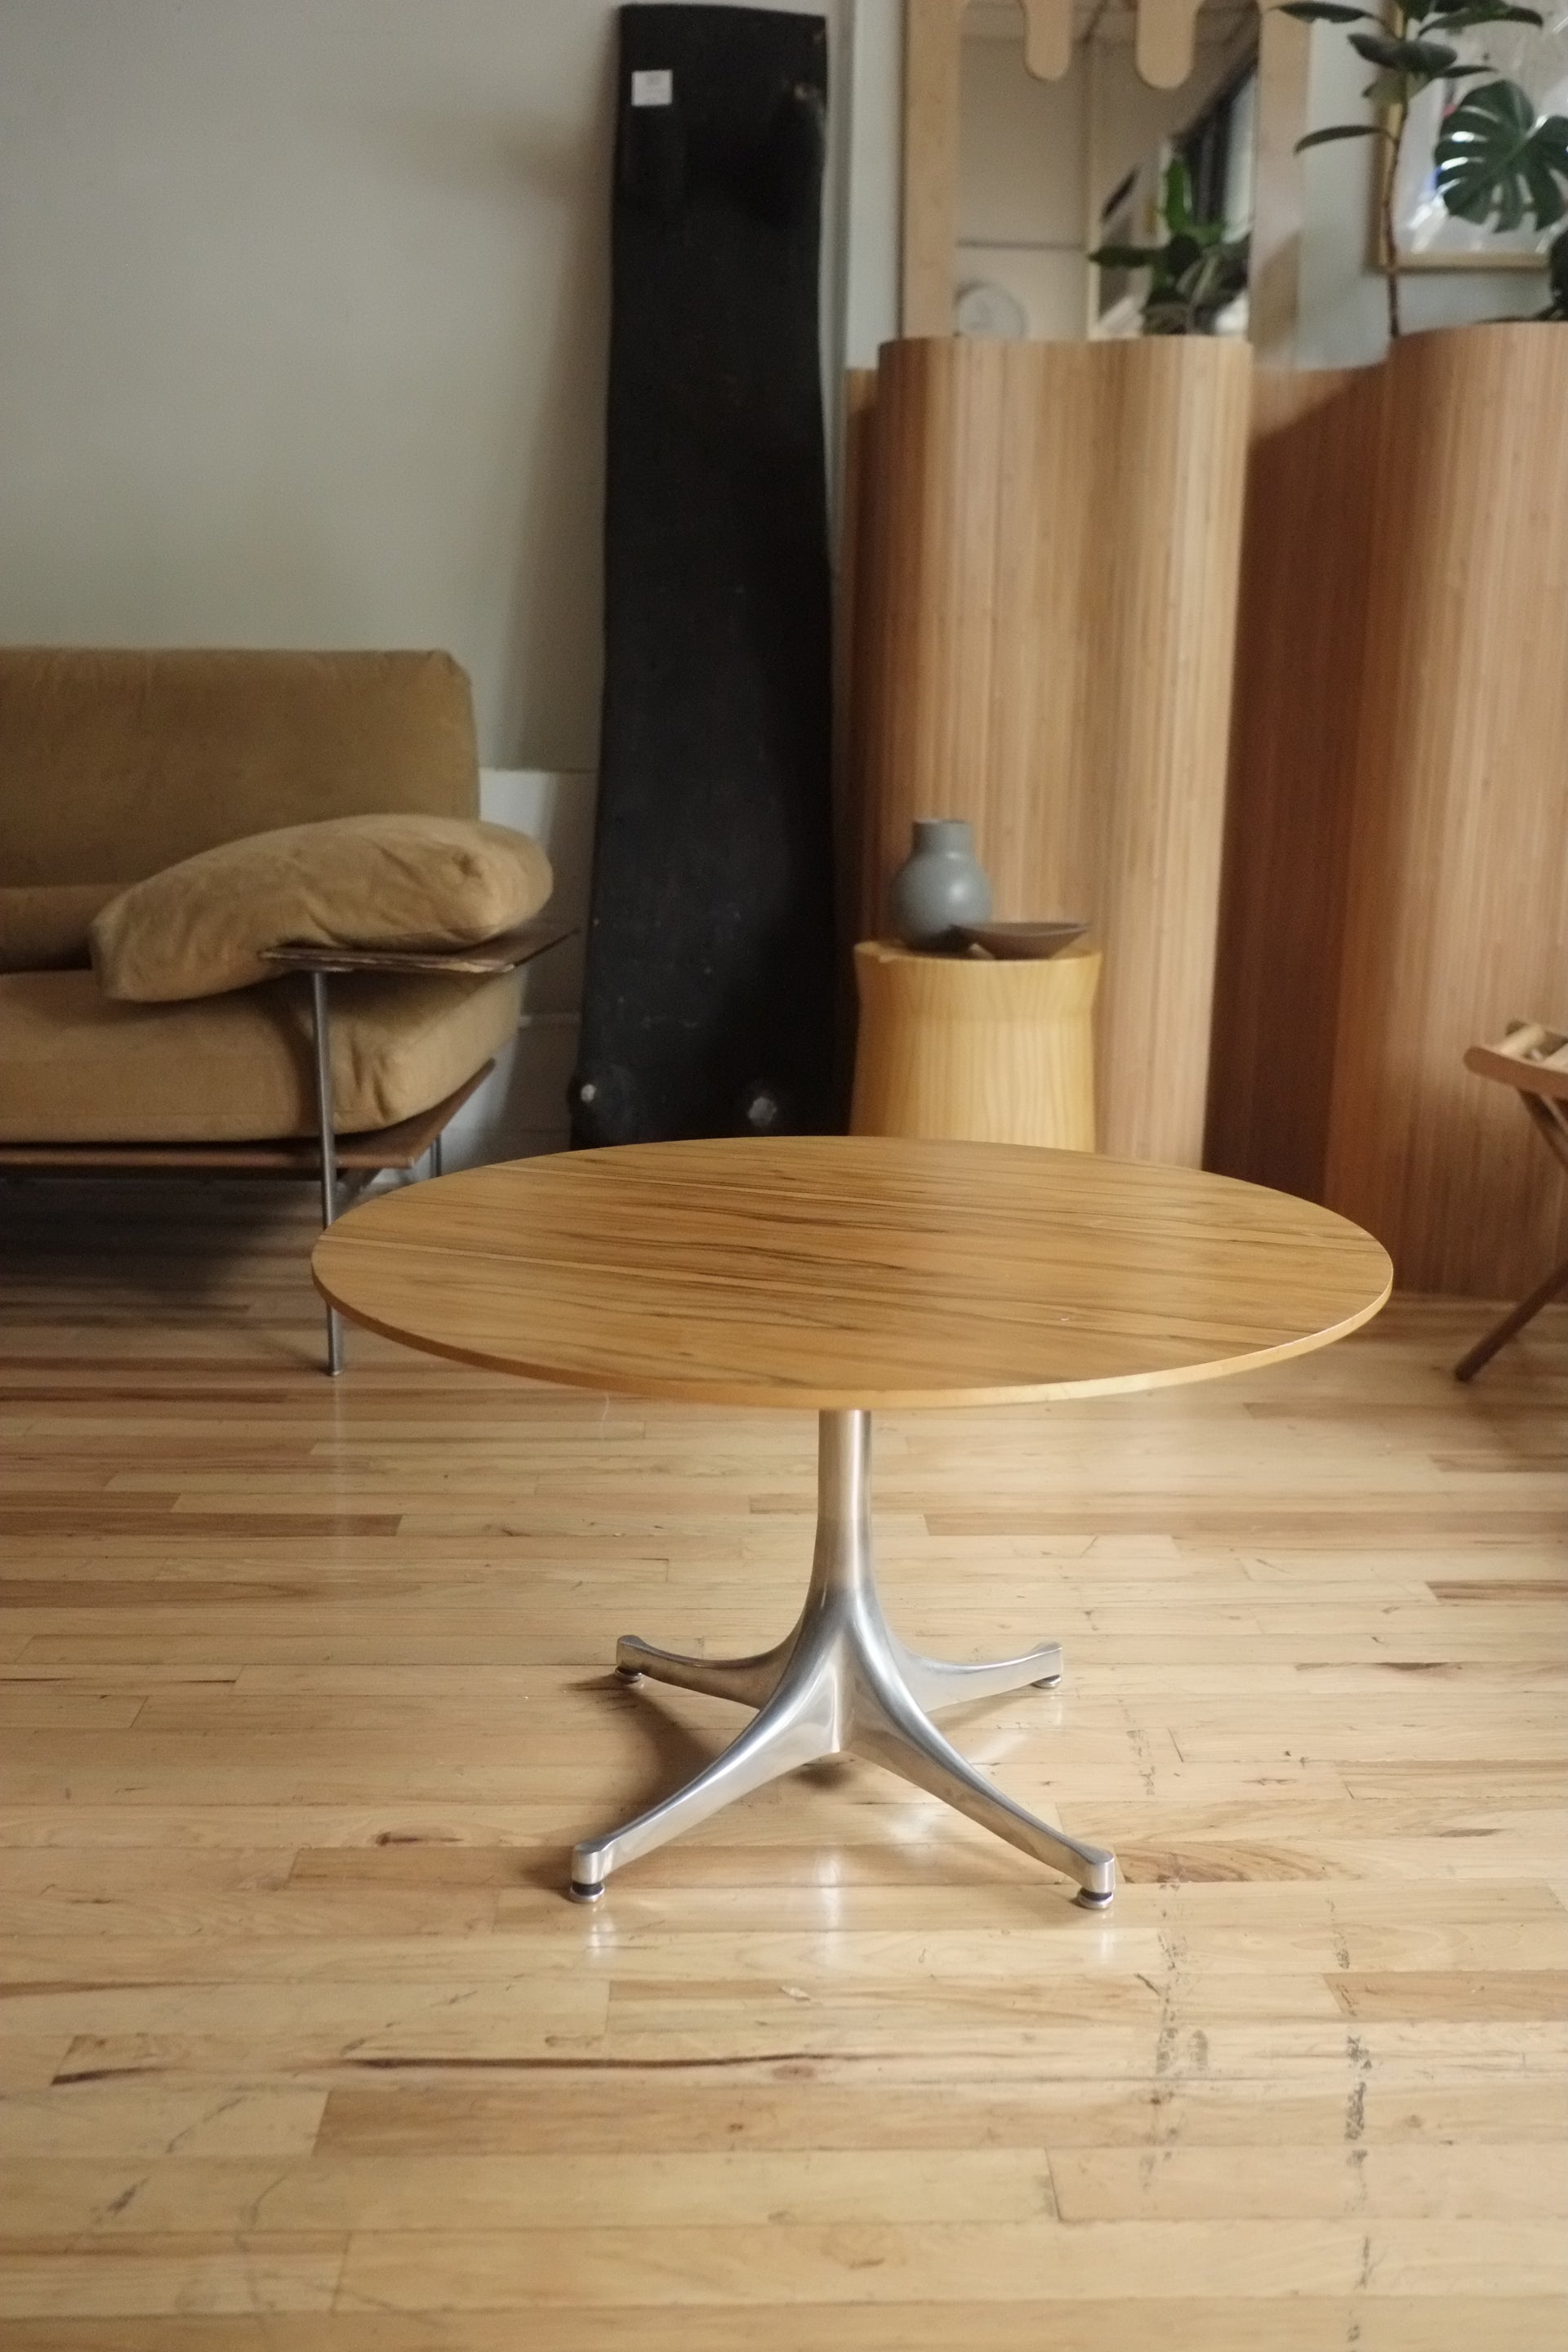 Pedestal table by George Nelson for Herman Miller